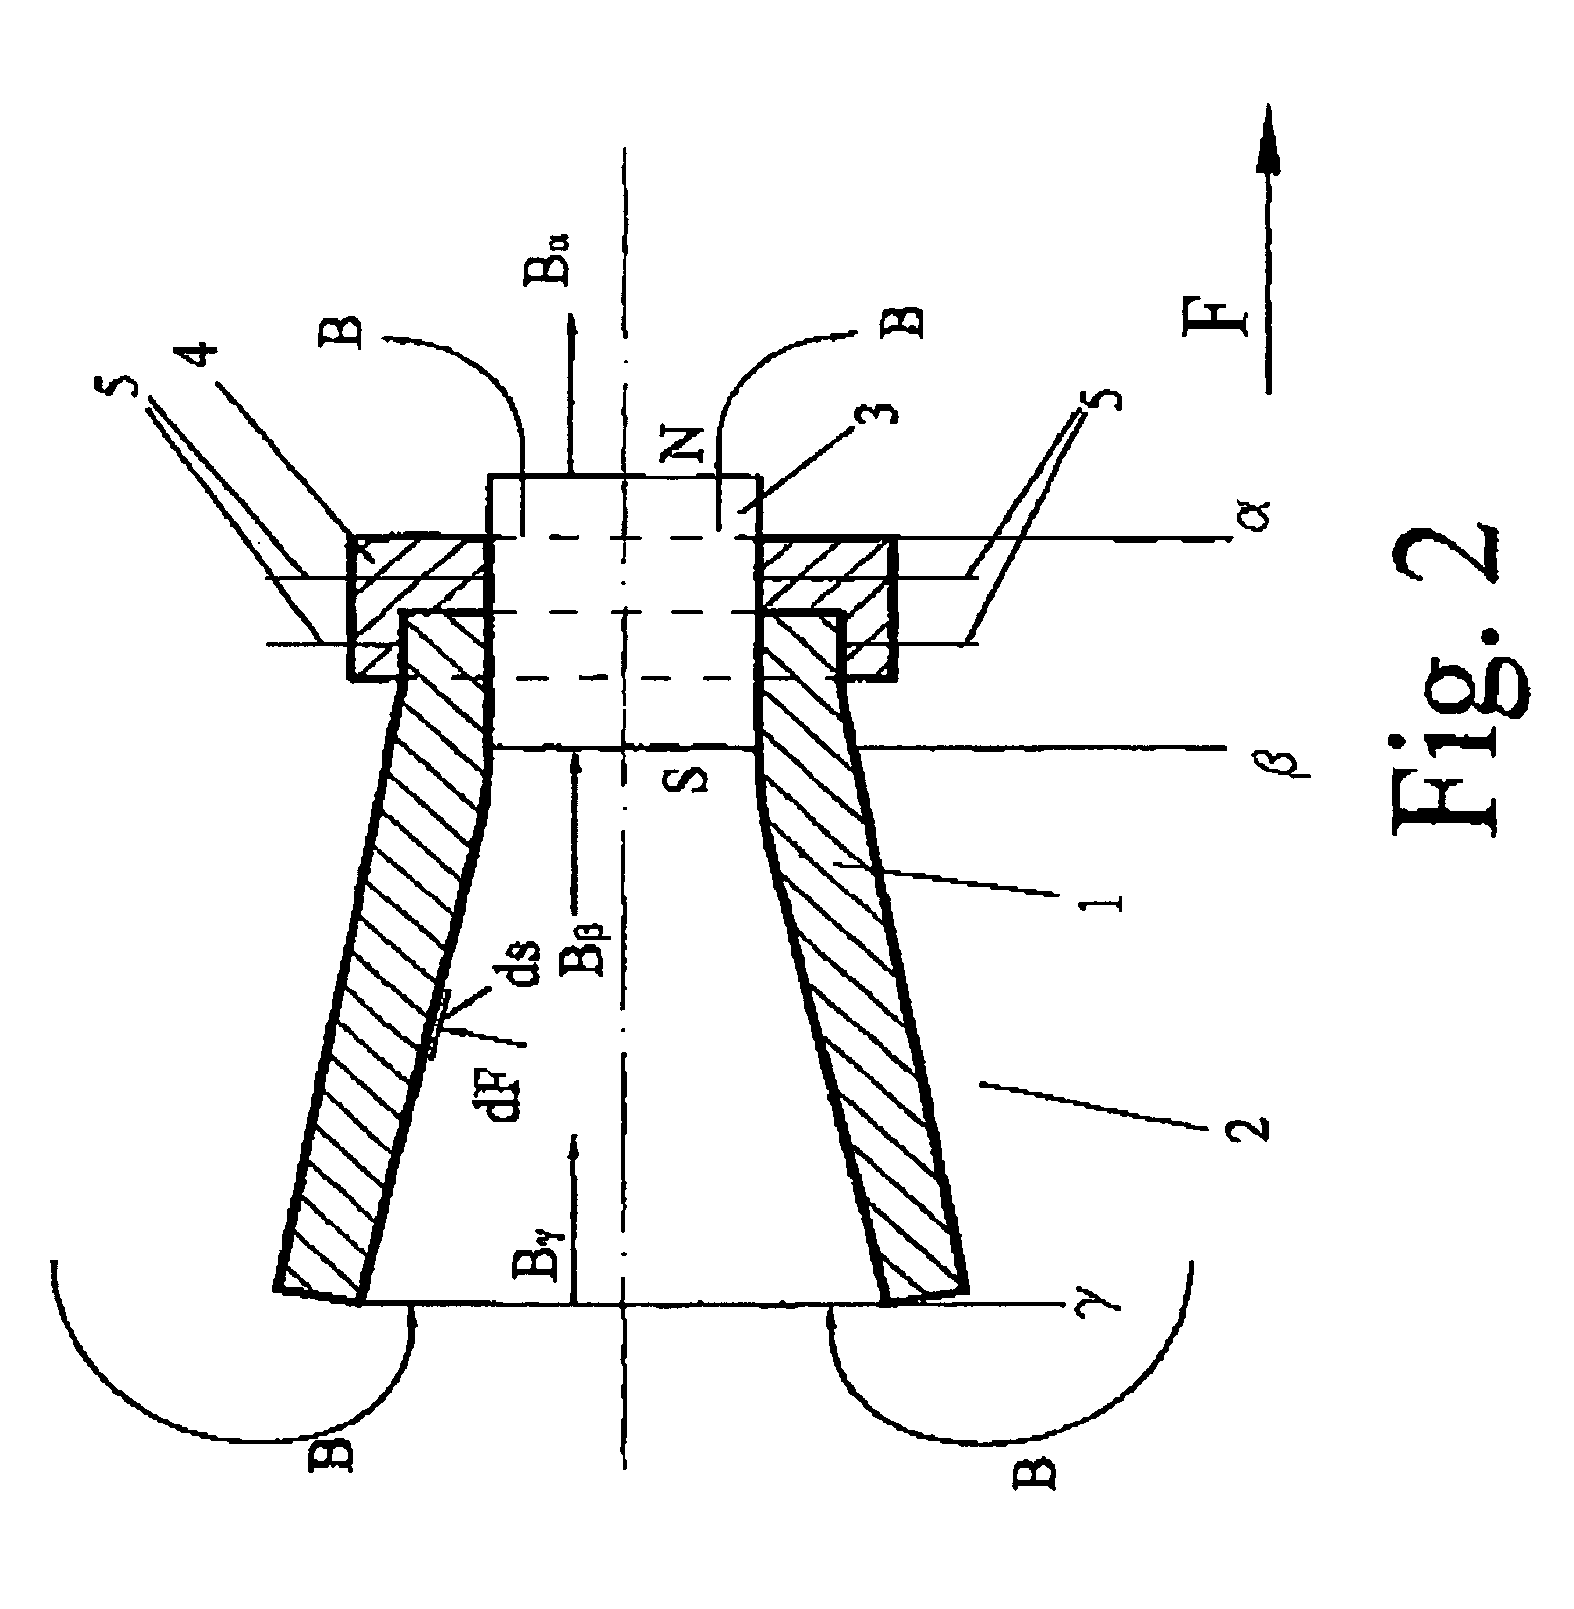 Magnetic propulsion device using superconductors